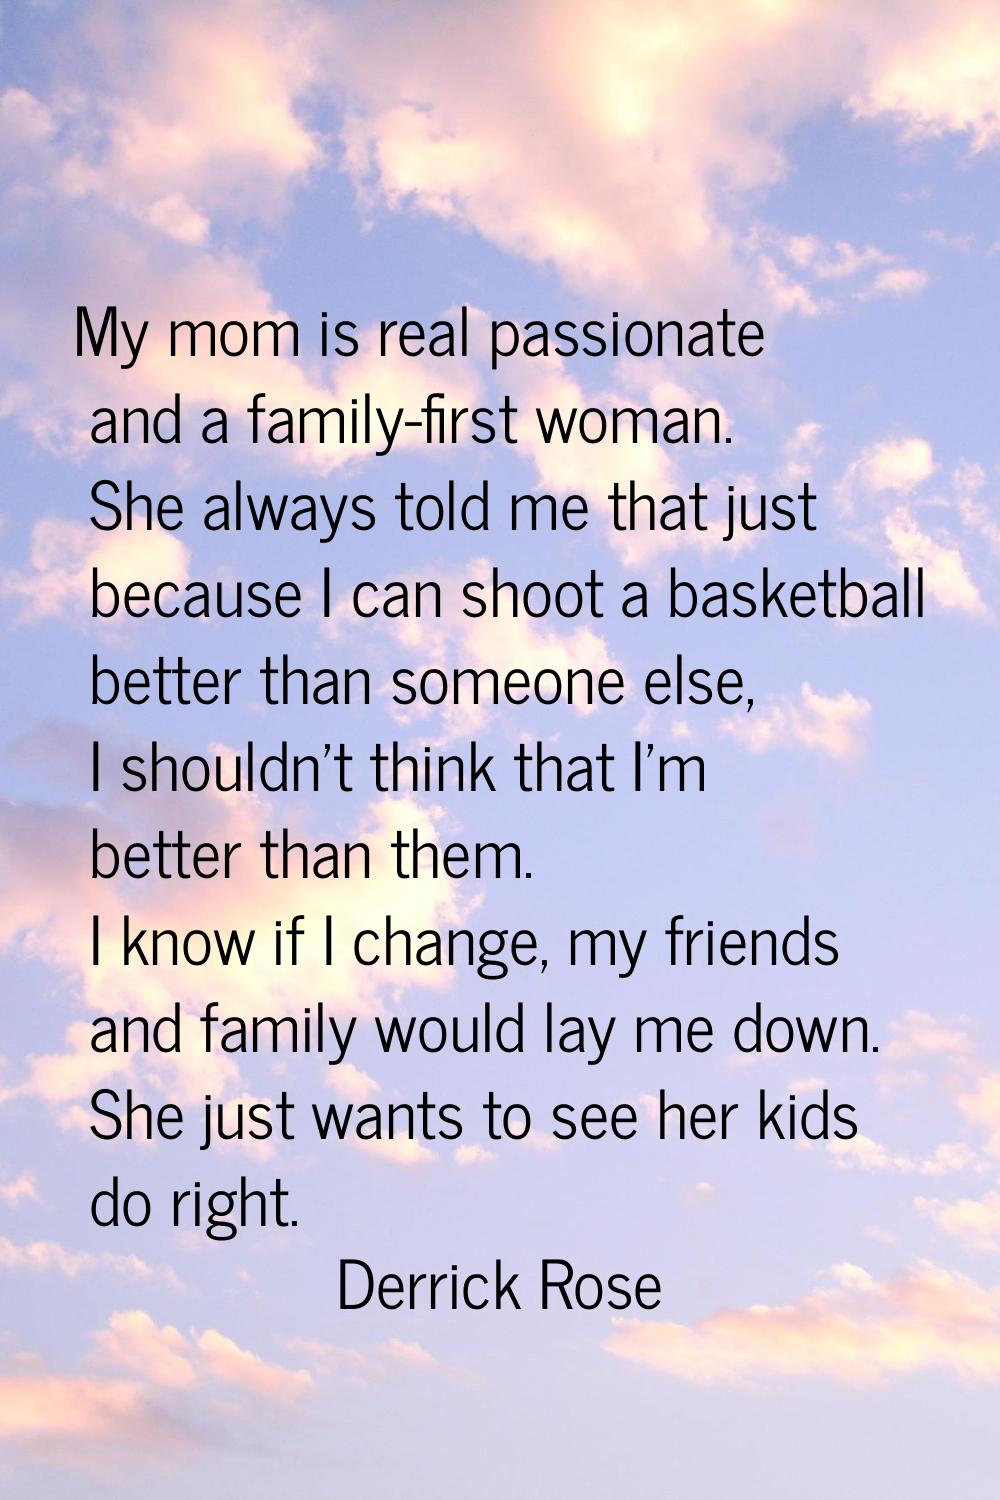 My mom is real passionate and a family-first woman. She always told me that just because I can shoo